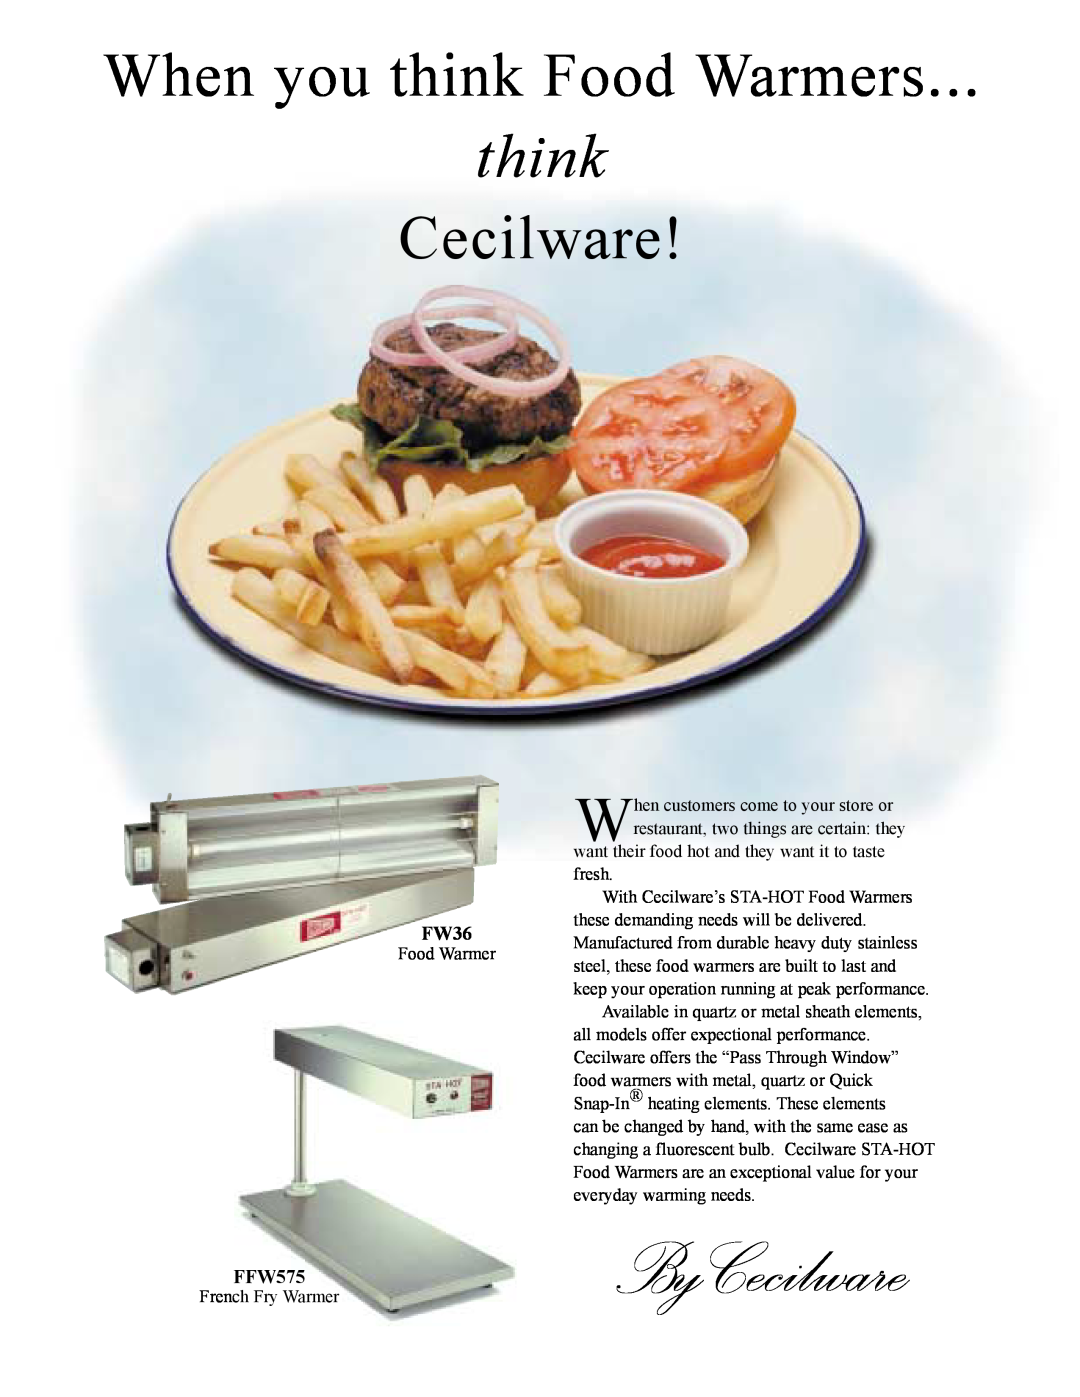 Cecilware FFW575 manual ByCecilware, When you think Food Warmers, FW36 